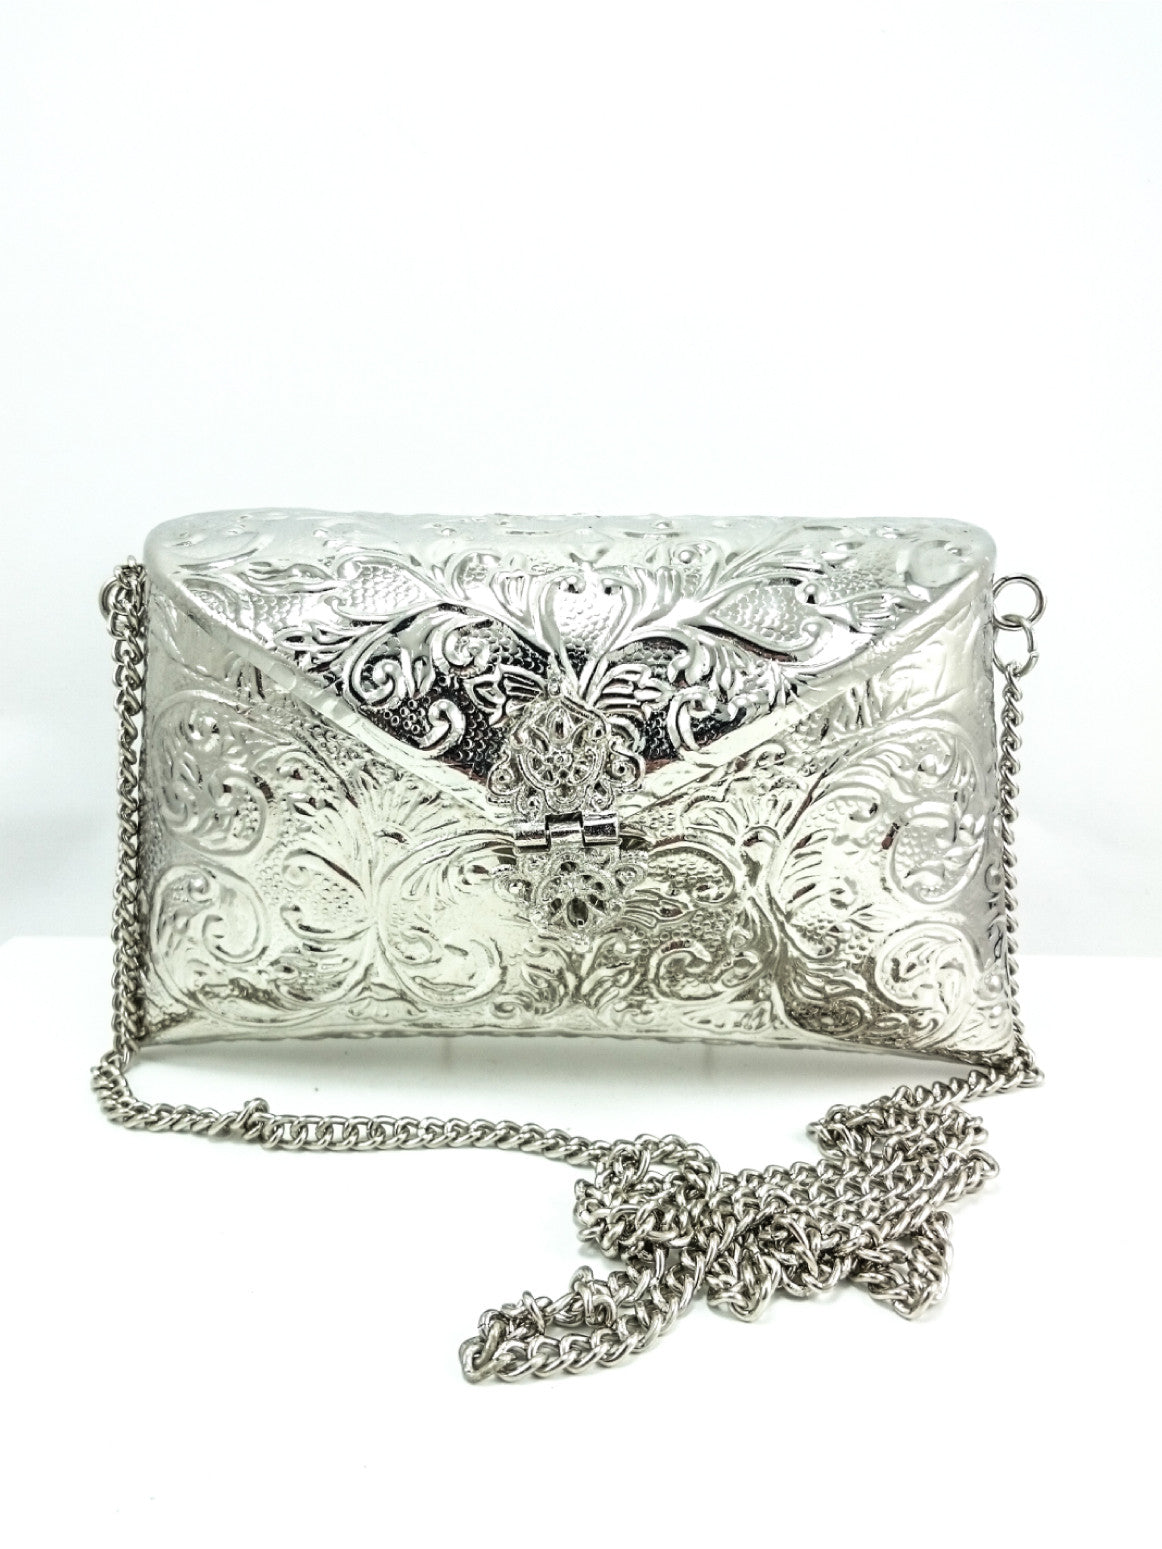 $3995 Judith Leiber Couture Women's Silver Allover Crystal Slim Clutch Purse  Bag | eBay